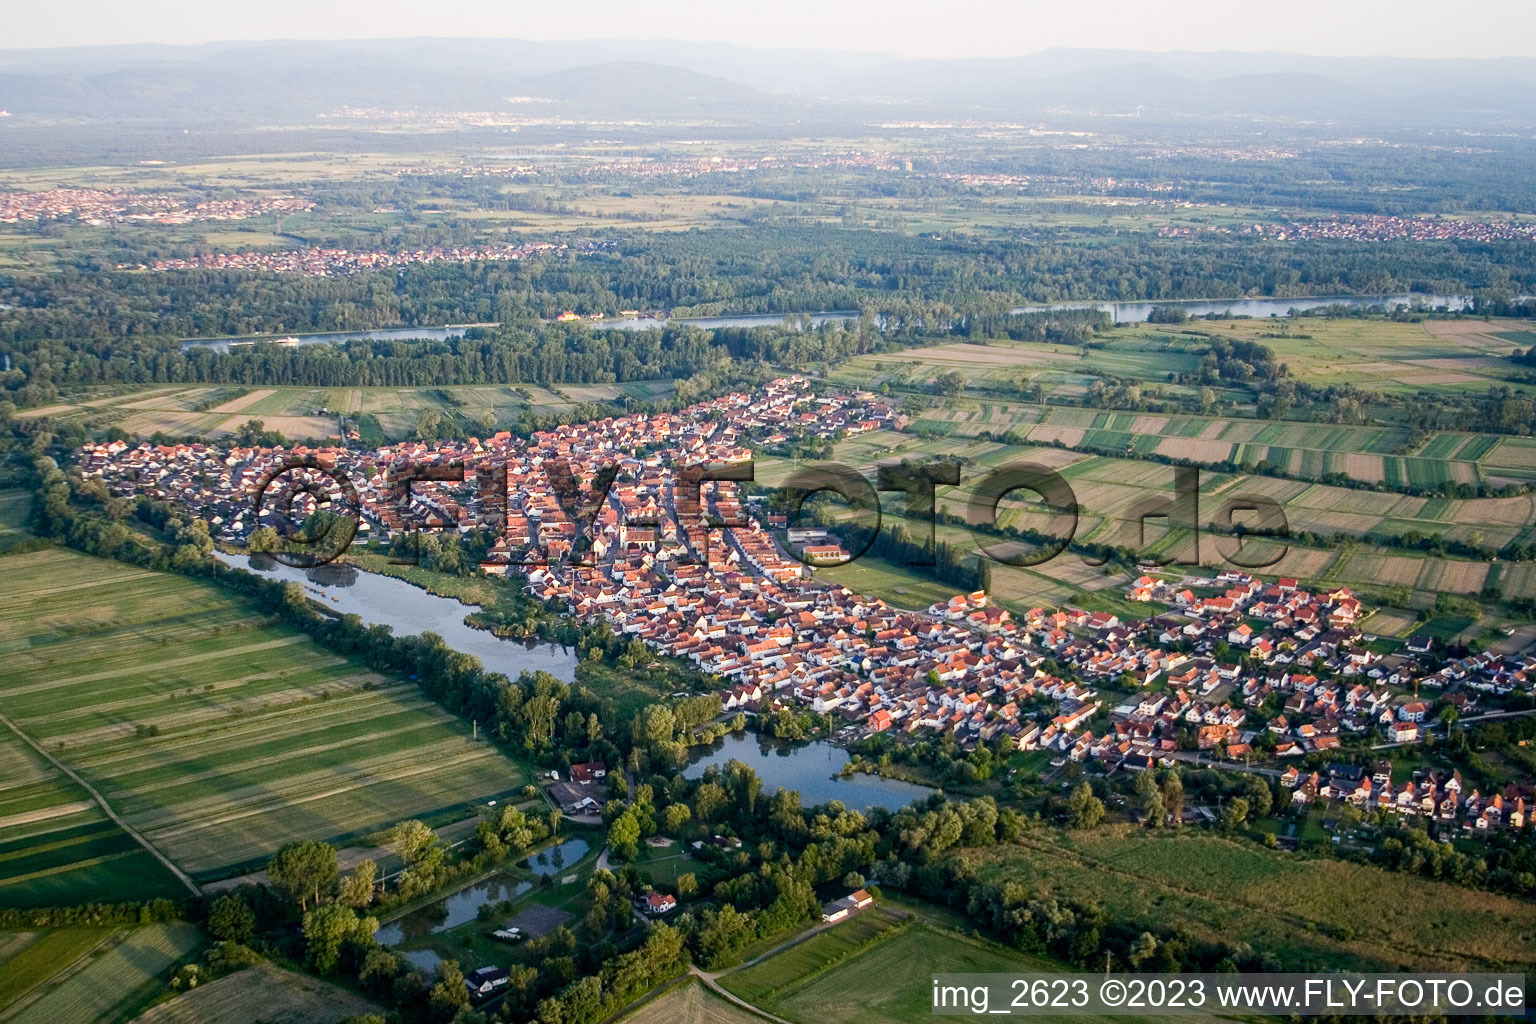 Neuburg in the state Rhineland-Palatinate, Germany viewn from the air